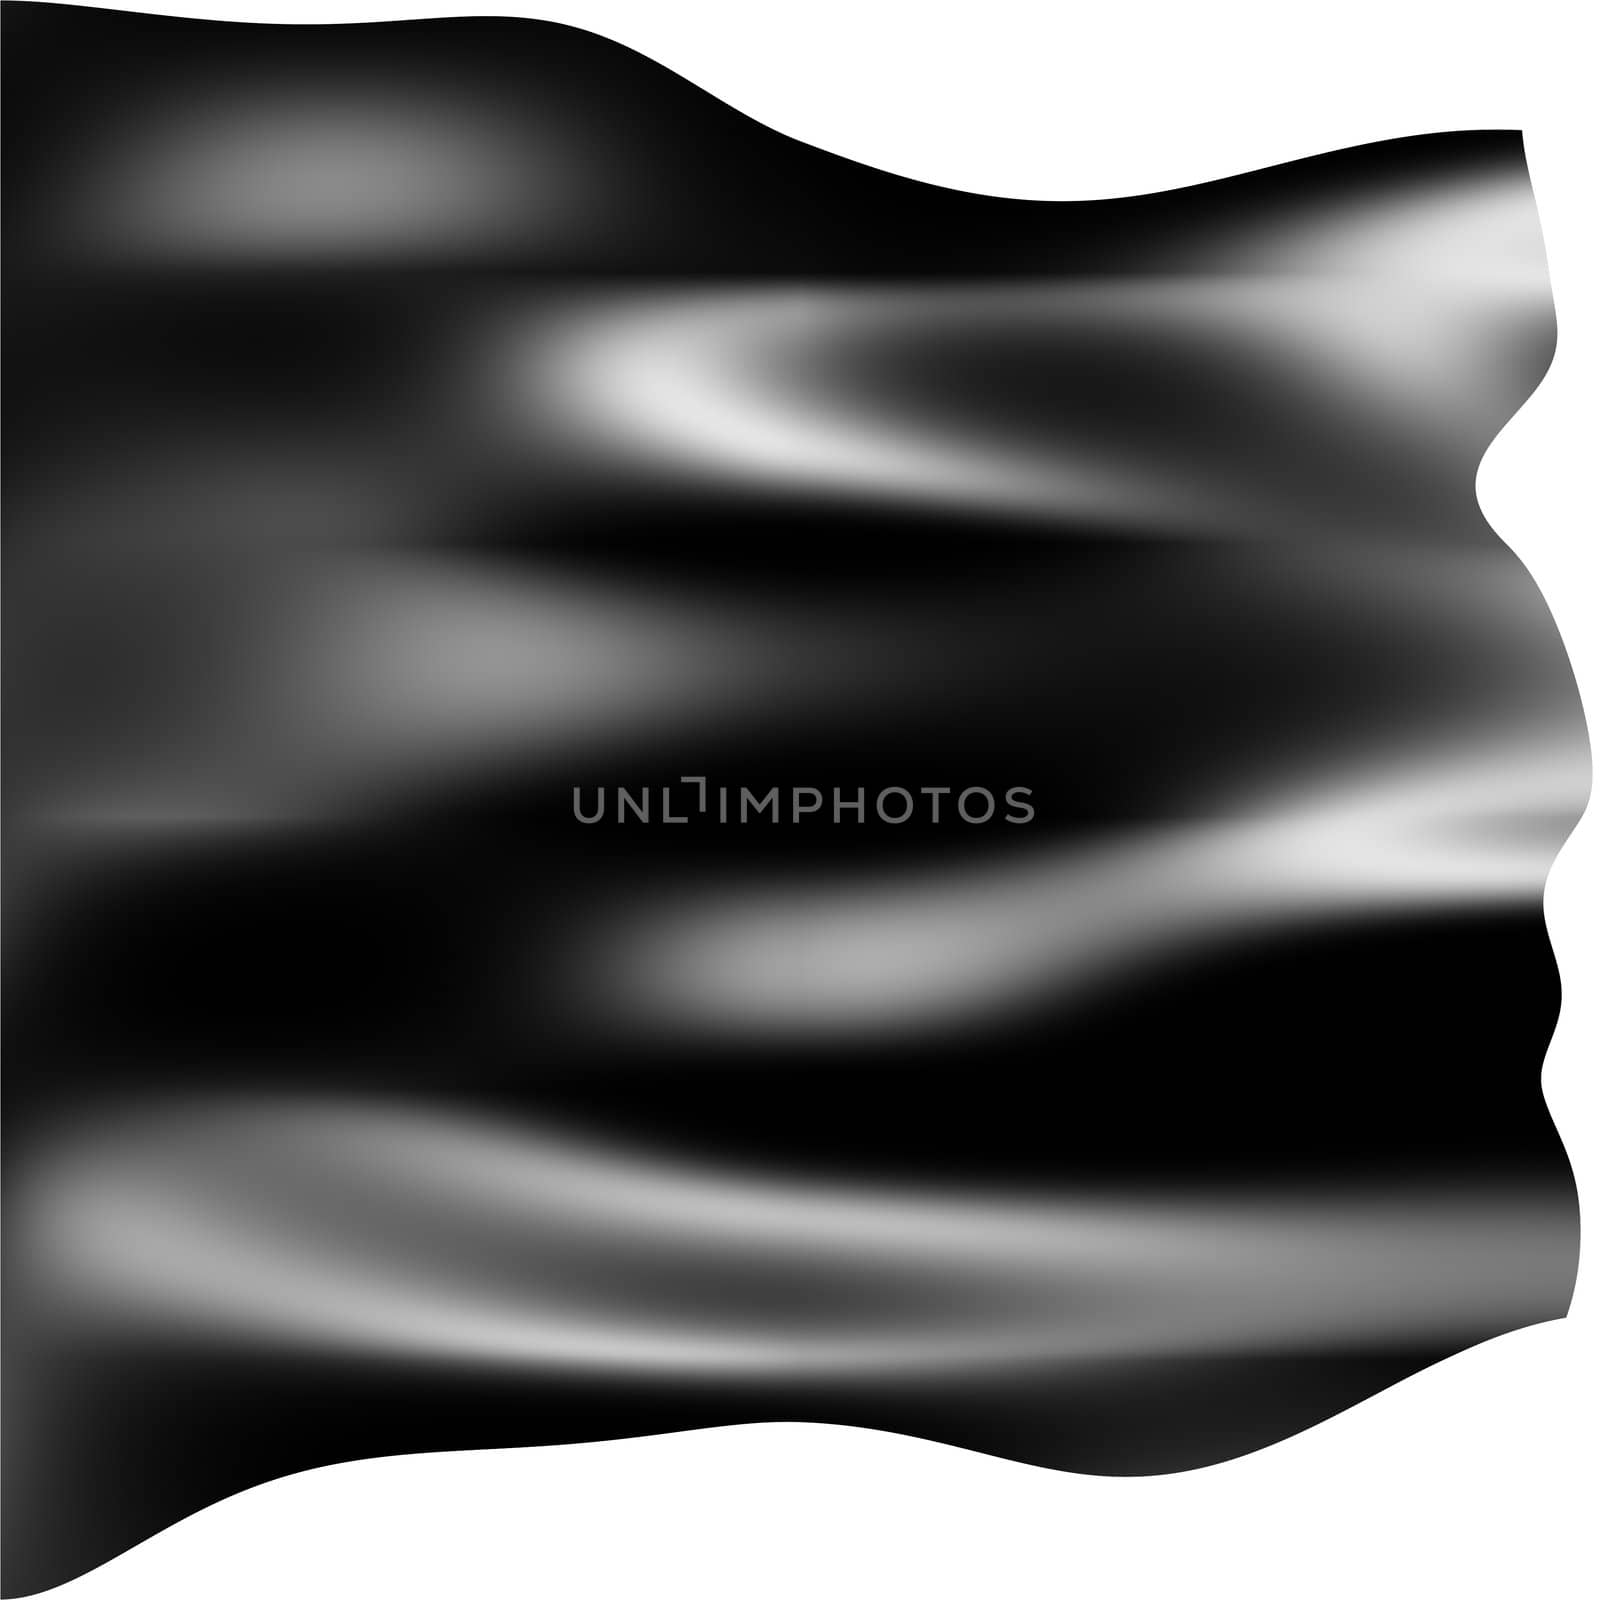 Anarchist black flag isolated in white